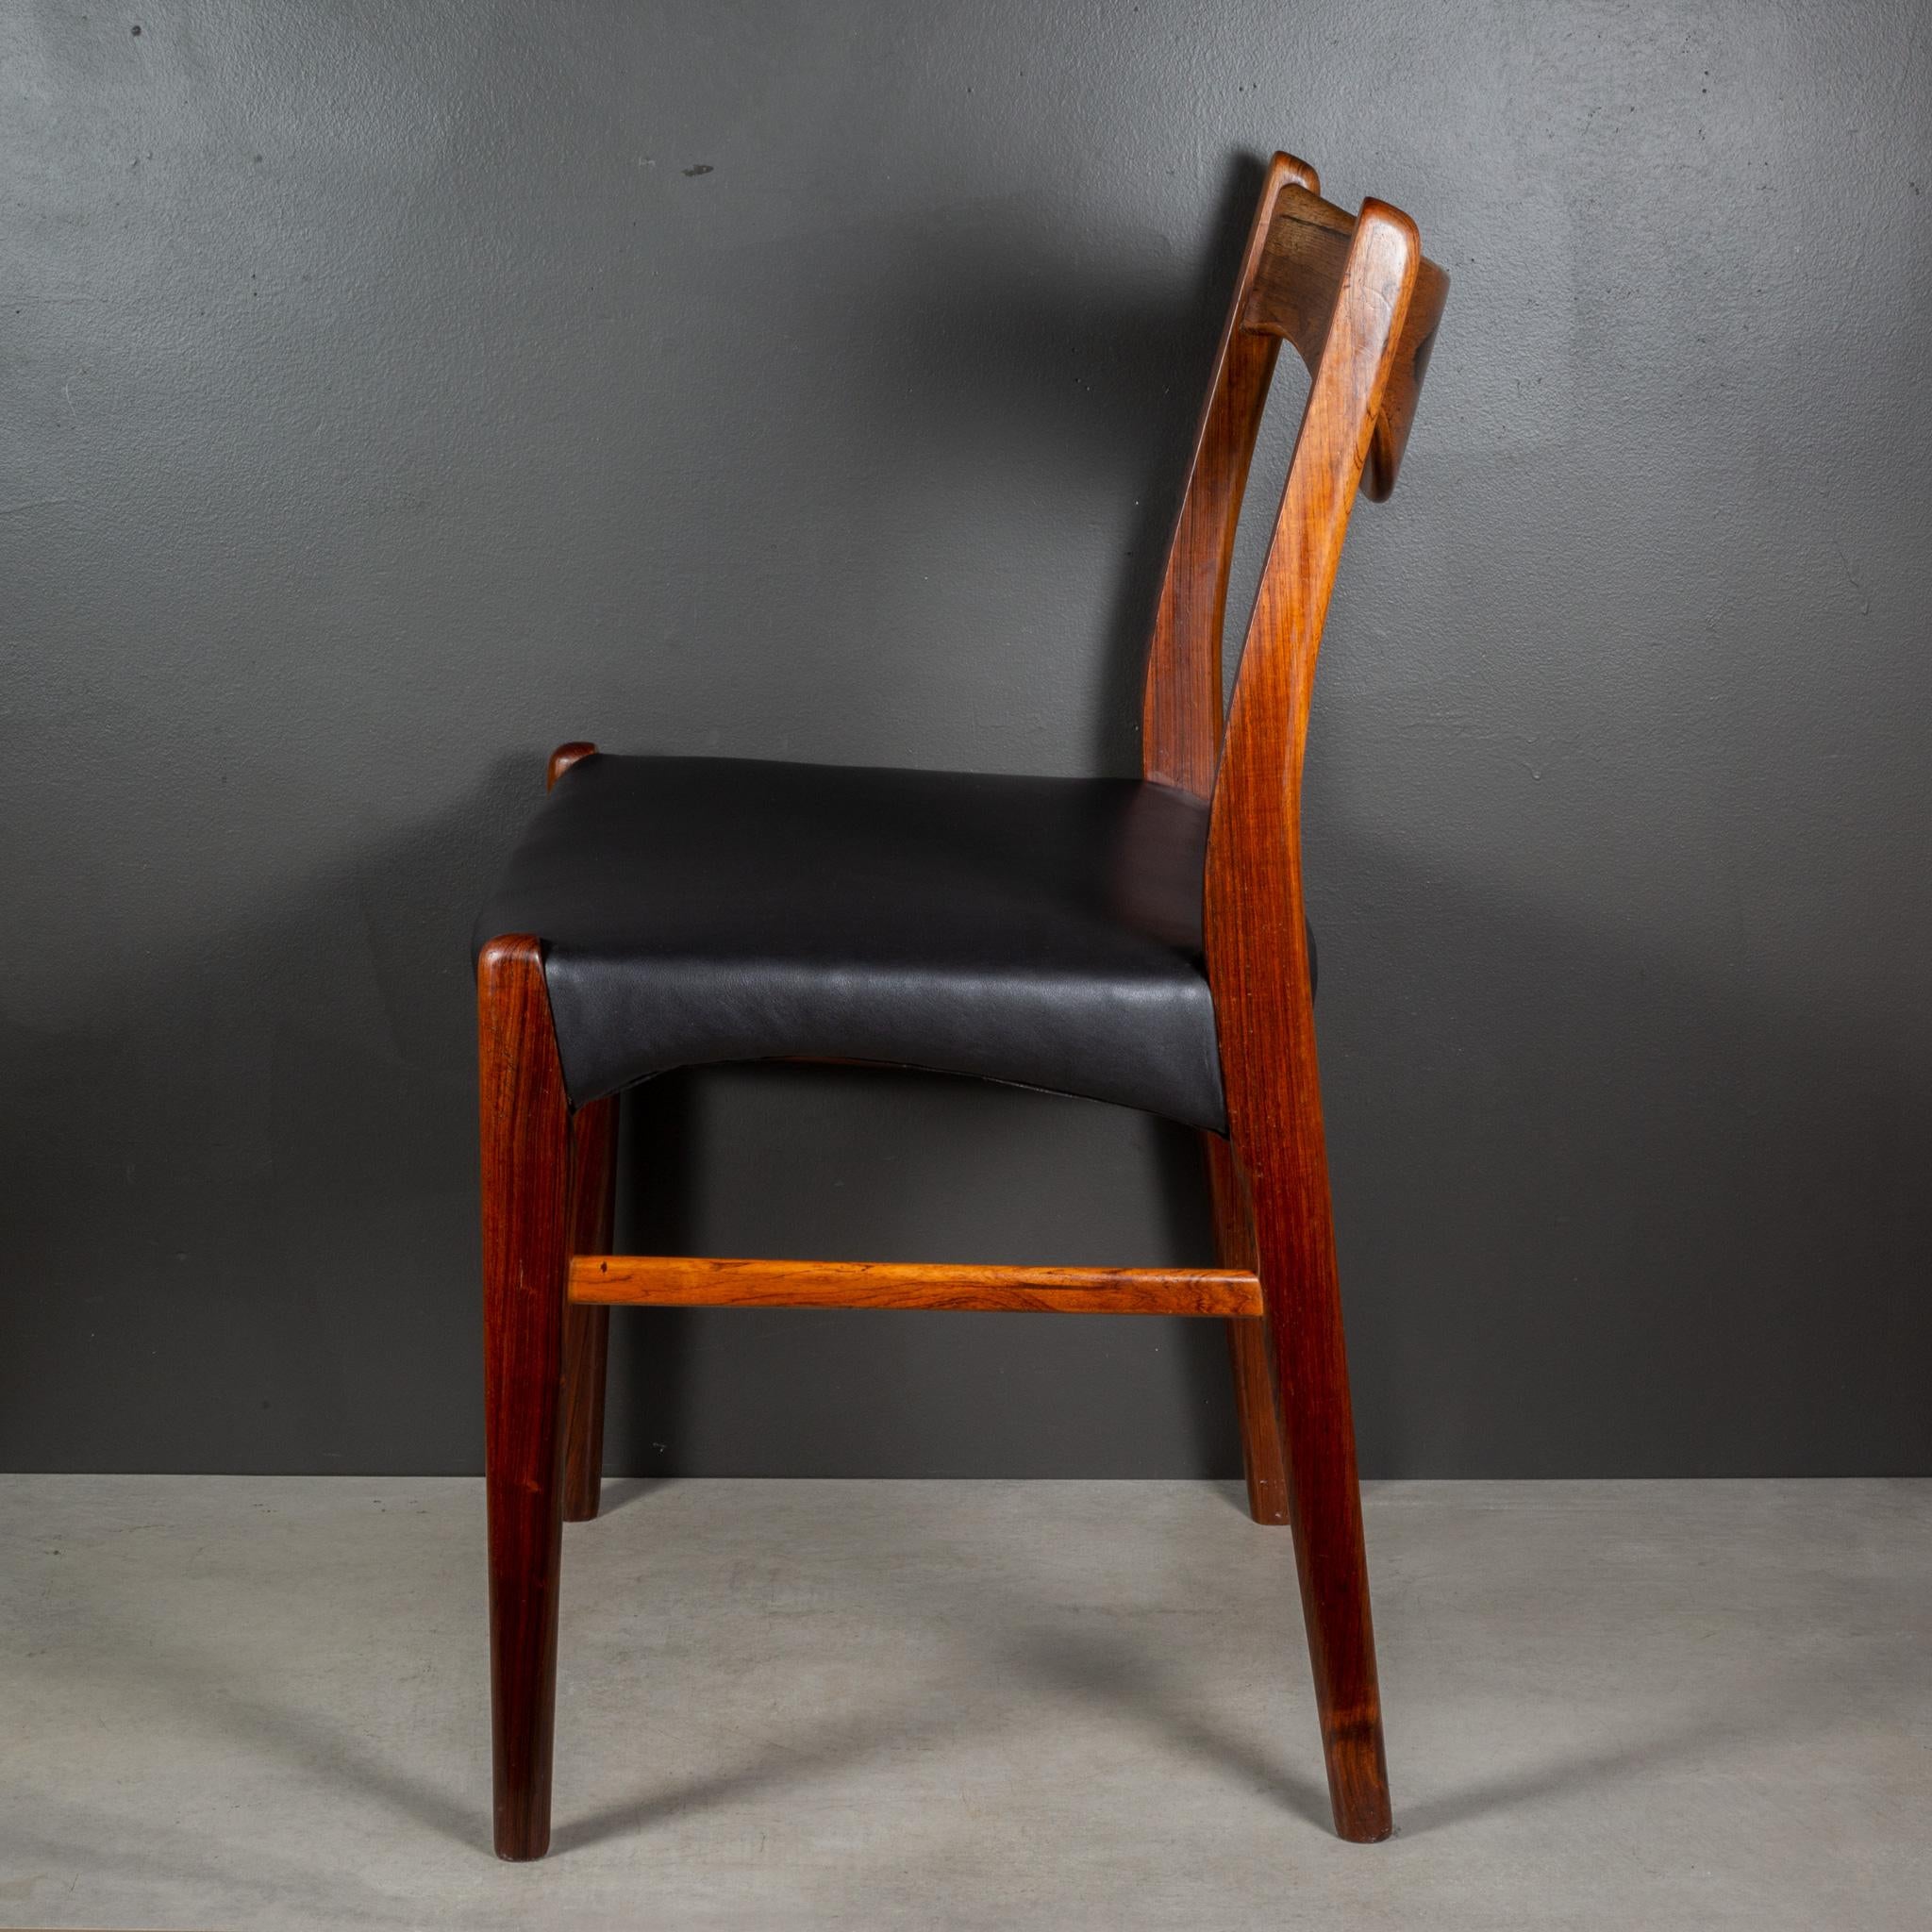 Arne Wahl Iversen Model GS61 Rosewood and Leather Dining Chairs c.1950 For Sale 2